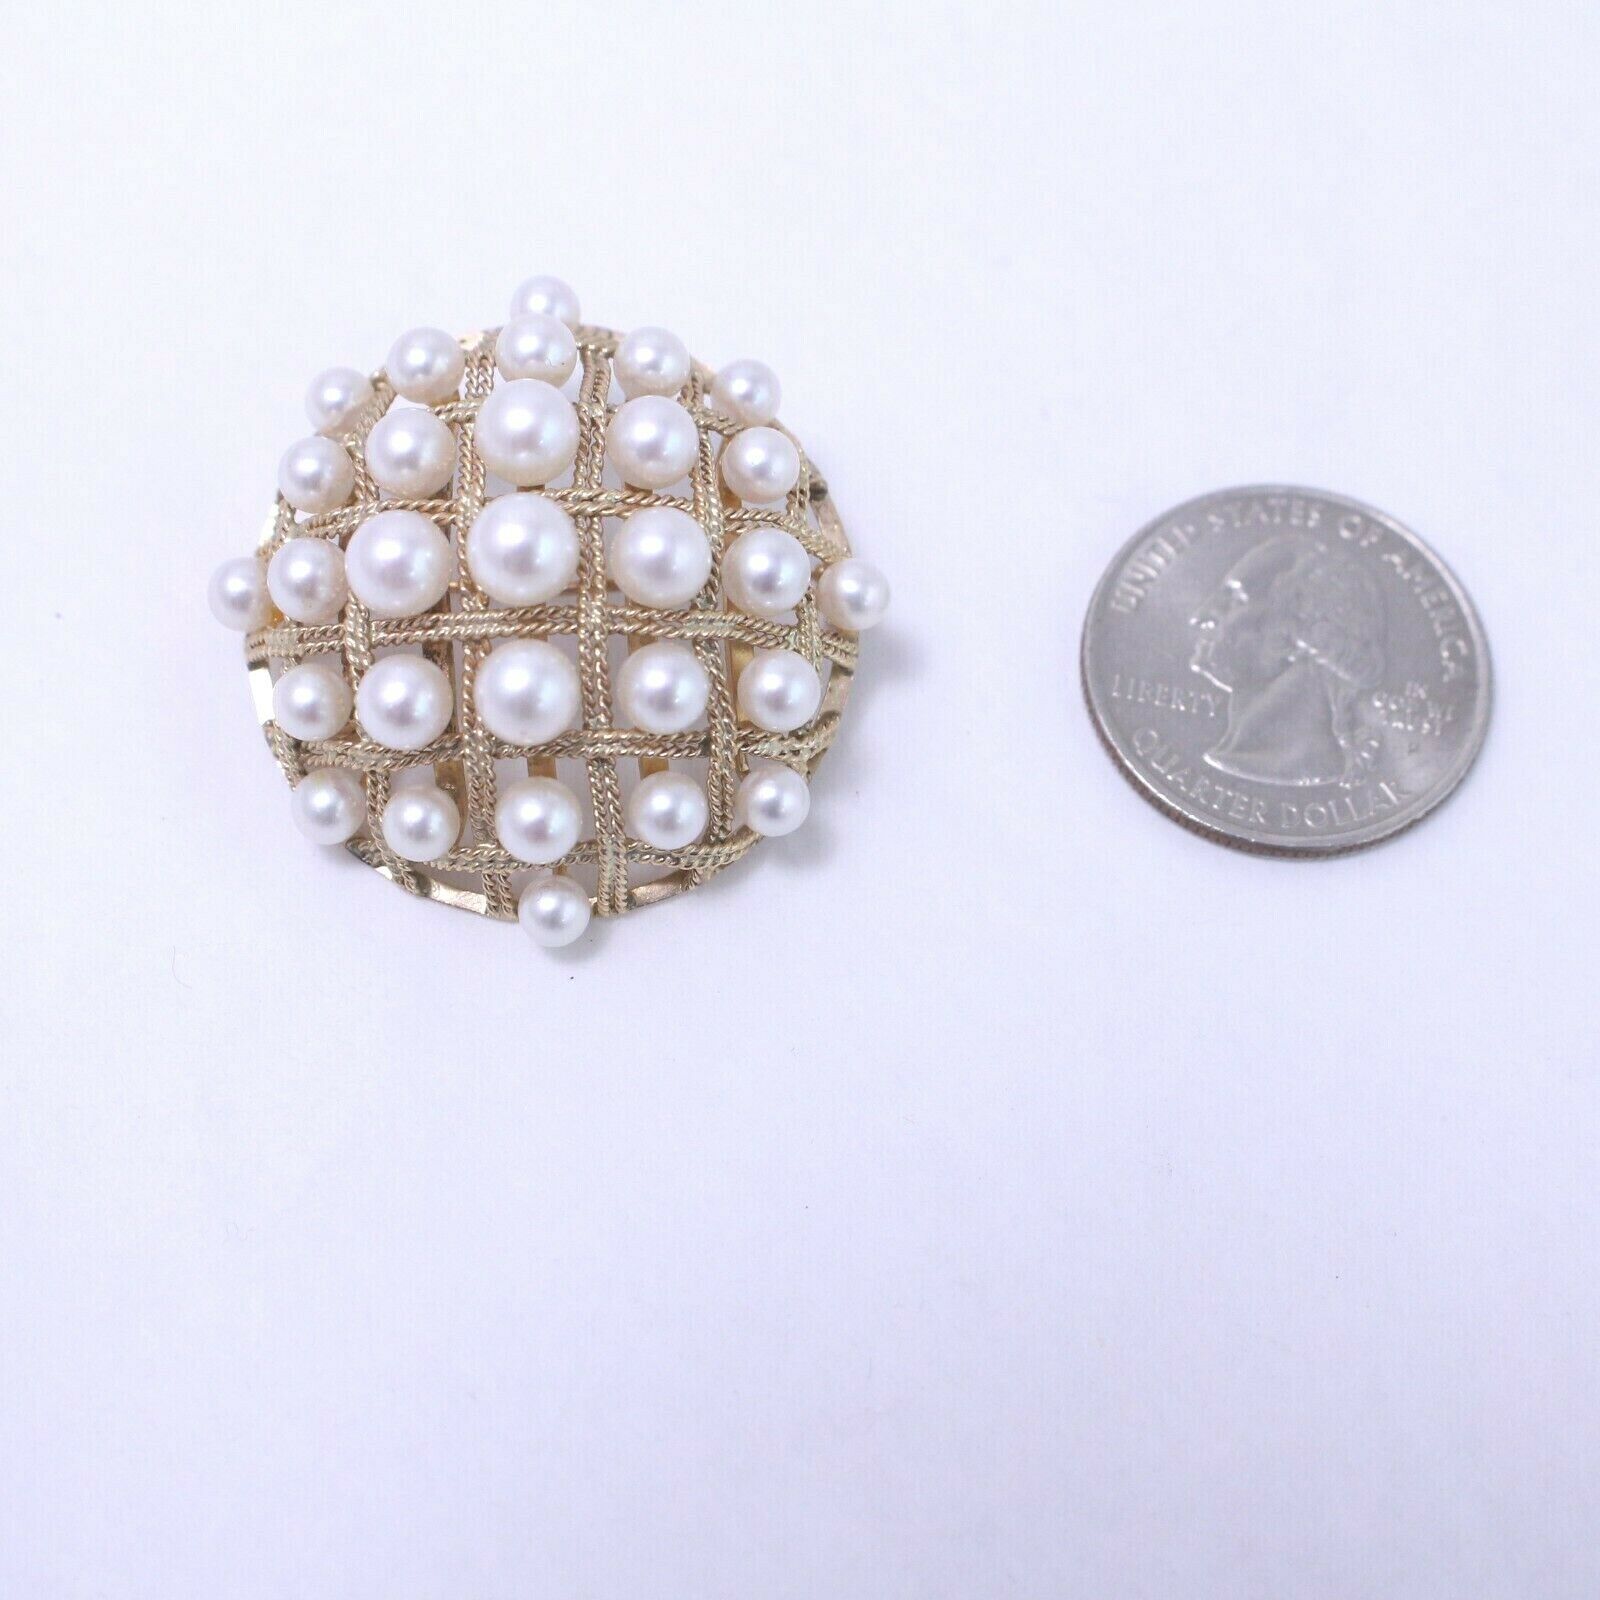 14k Yellow Gold & Pearl Dome Shaped Brooch